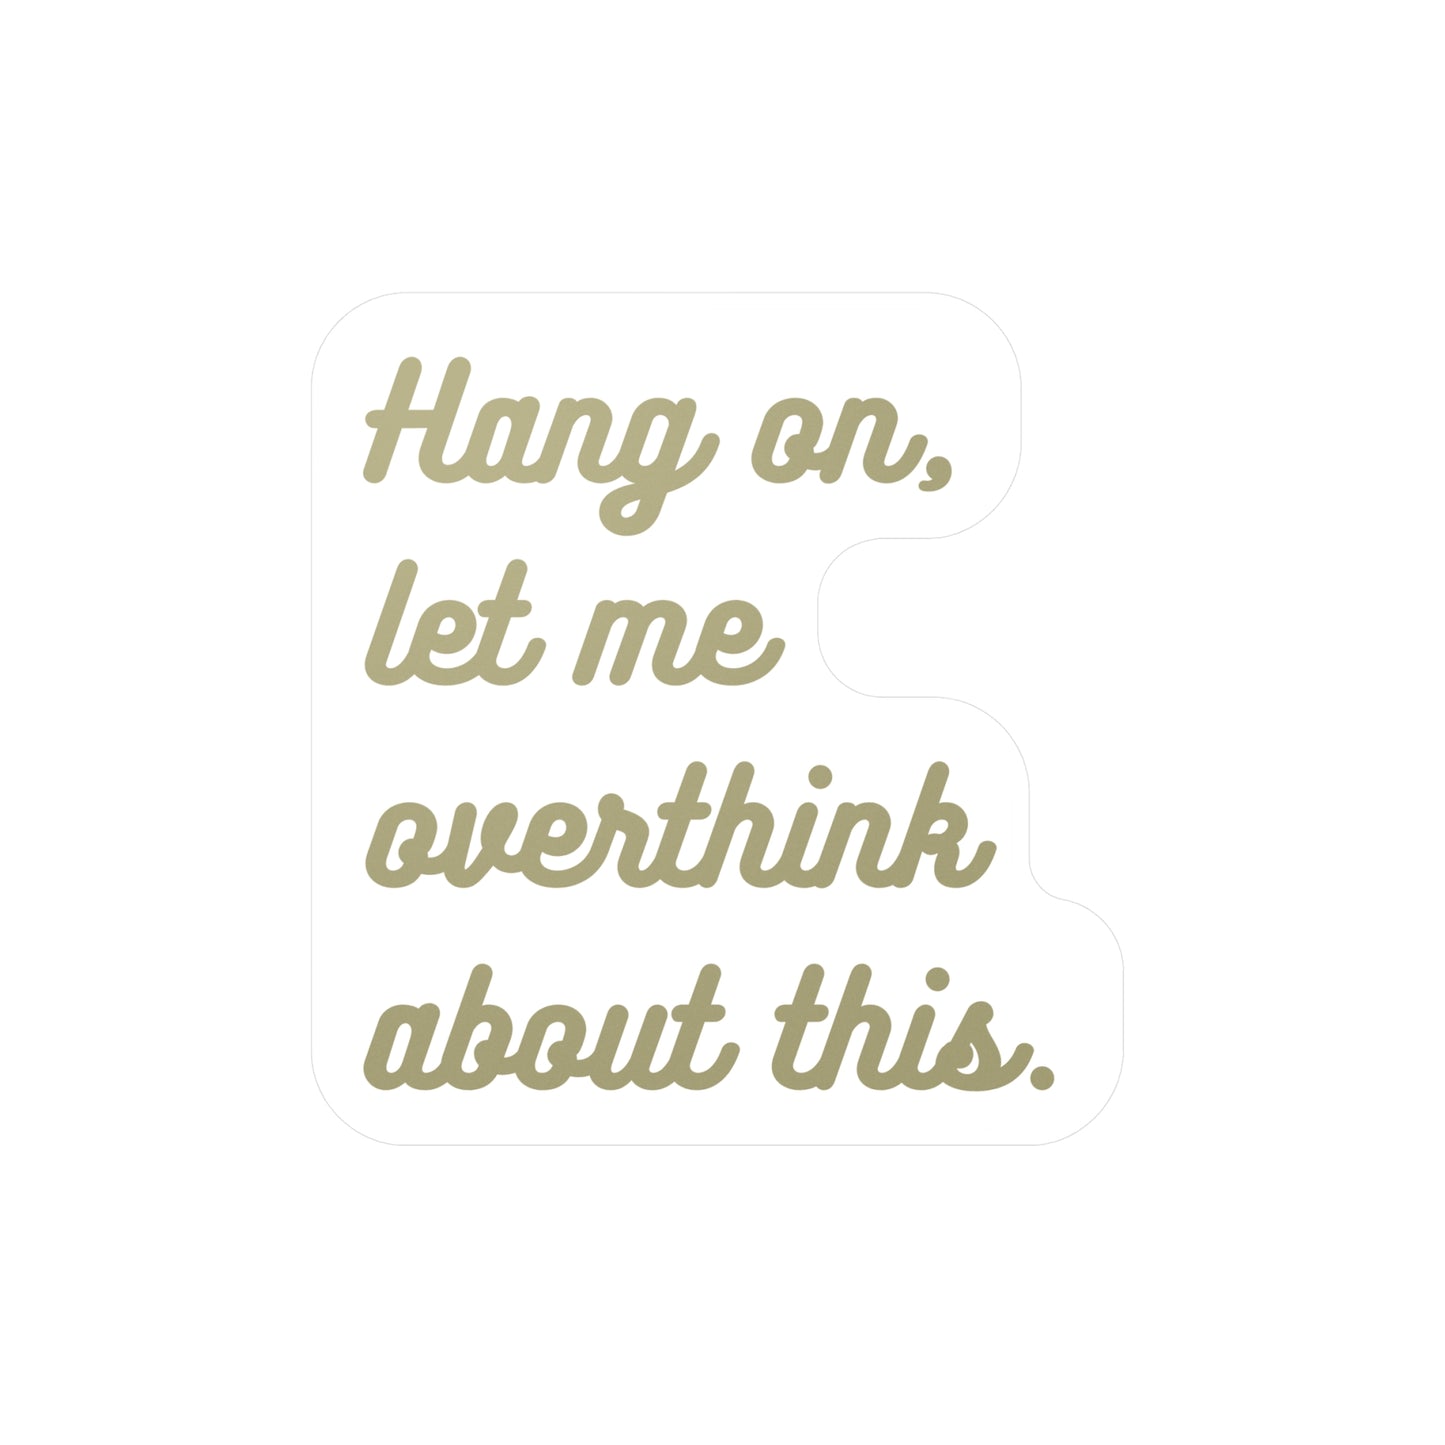 Hang on...let me overthink about this | Sticker, Overthinking, Overthinker, Overthink